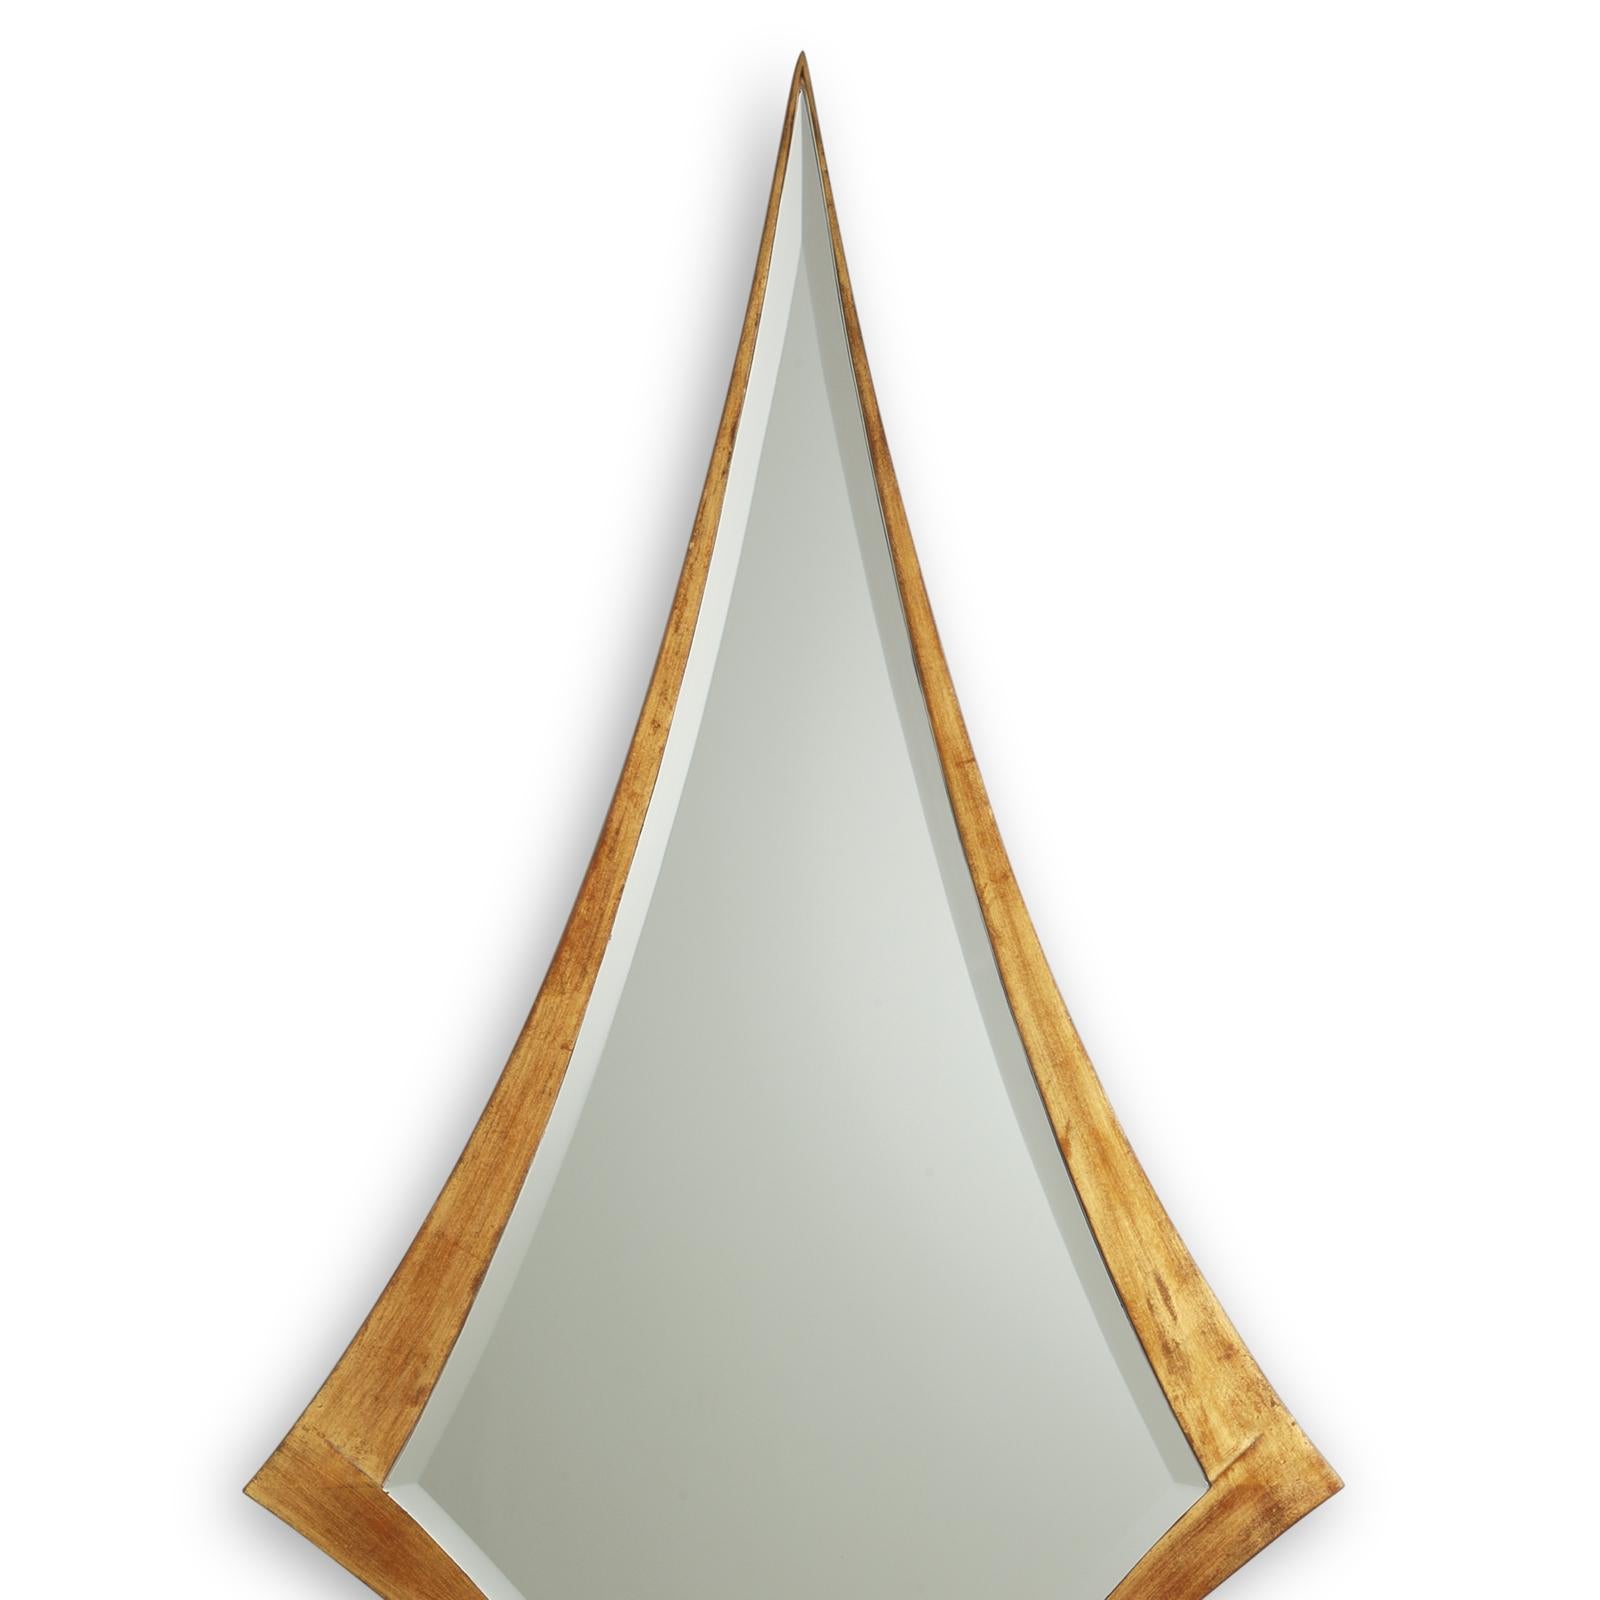 Mirror needle gold with solid mahogany
wood frame hand-painted in antique gold leaf.
With bevelled mirror glass.

   
  